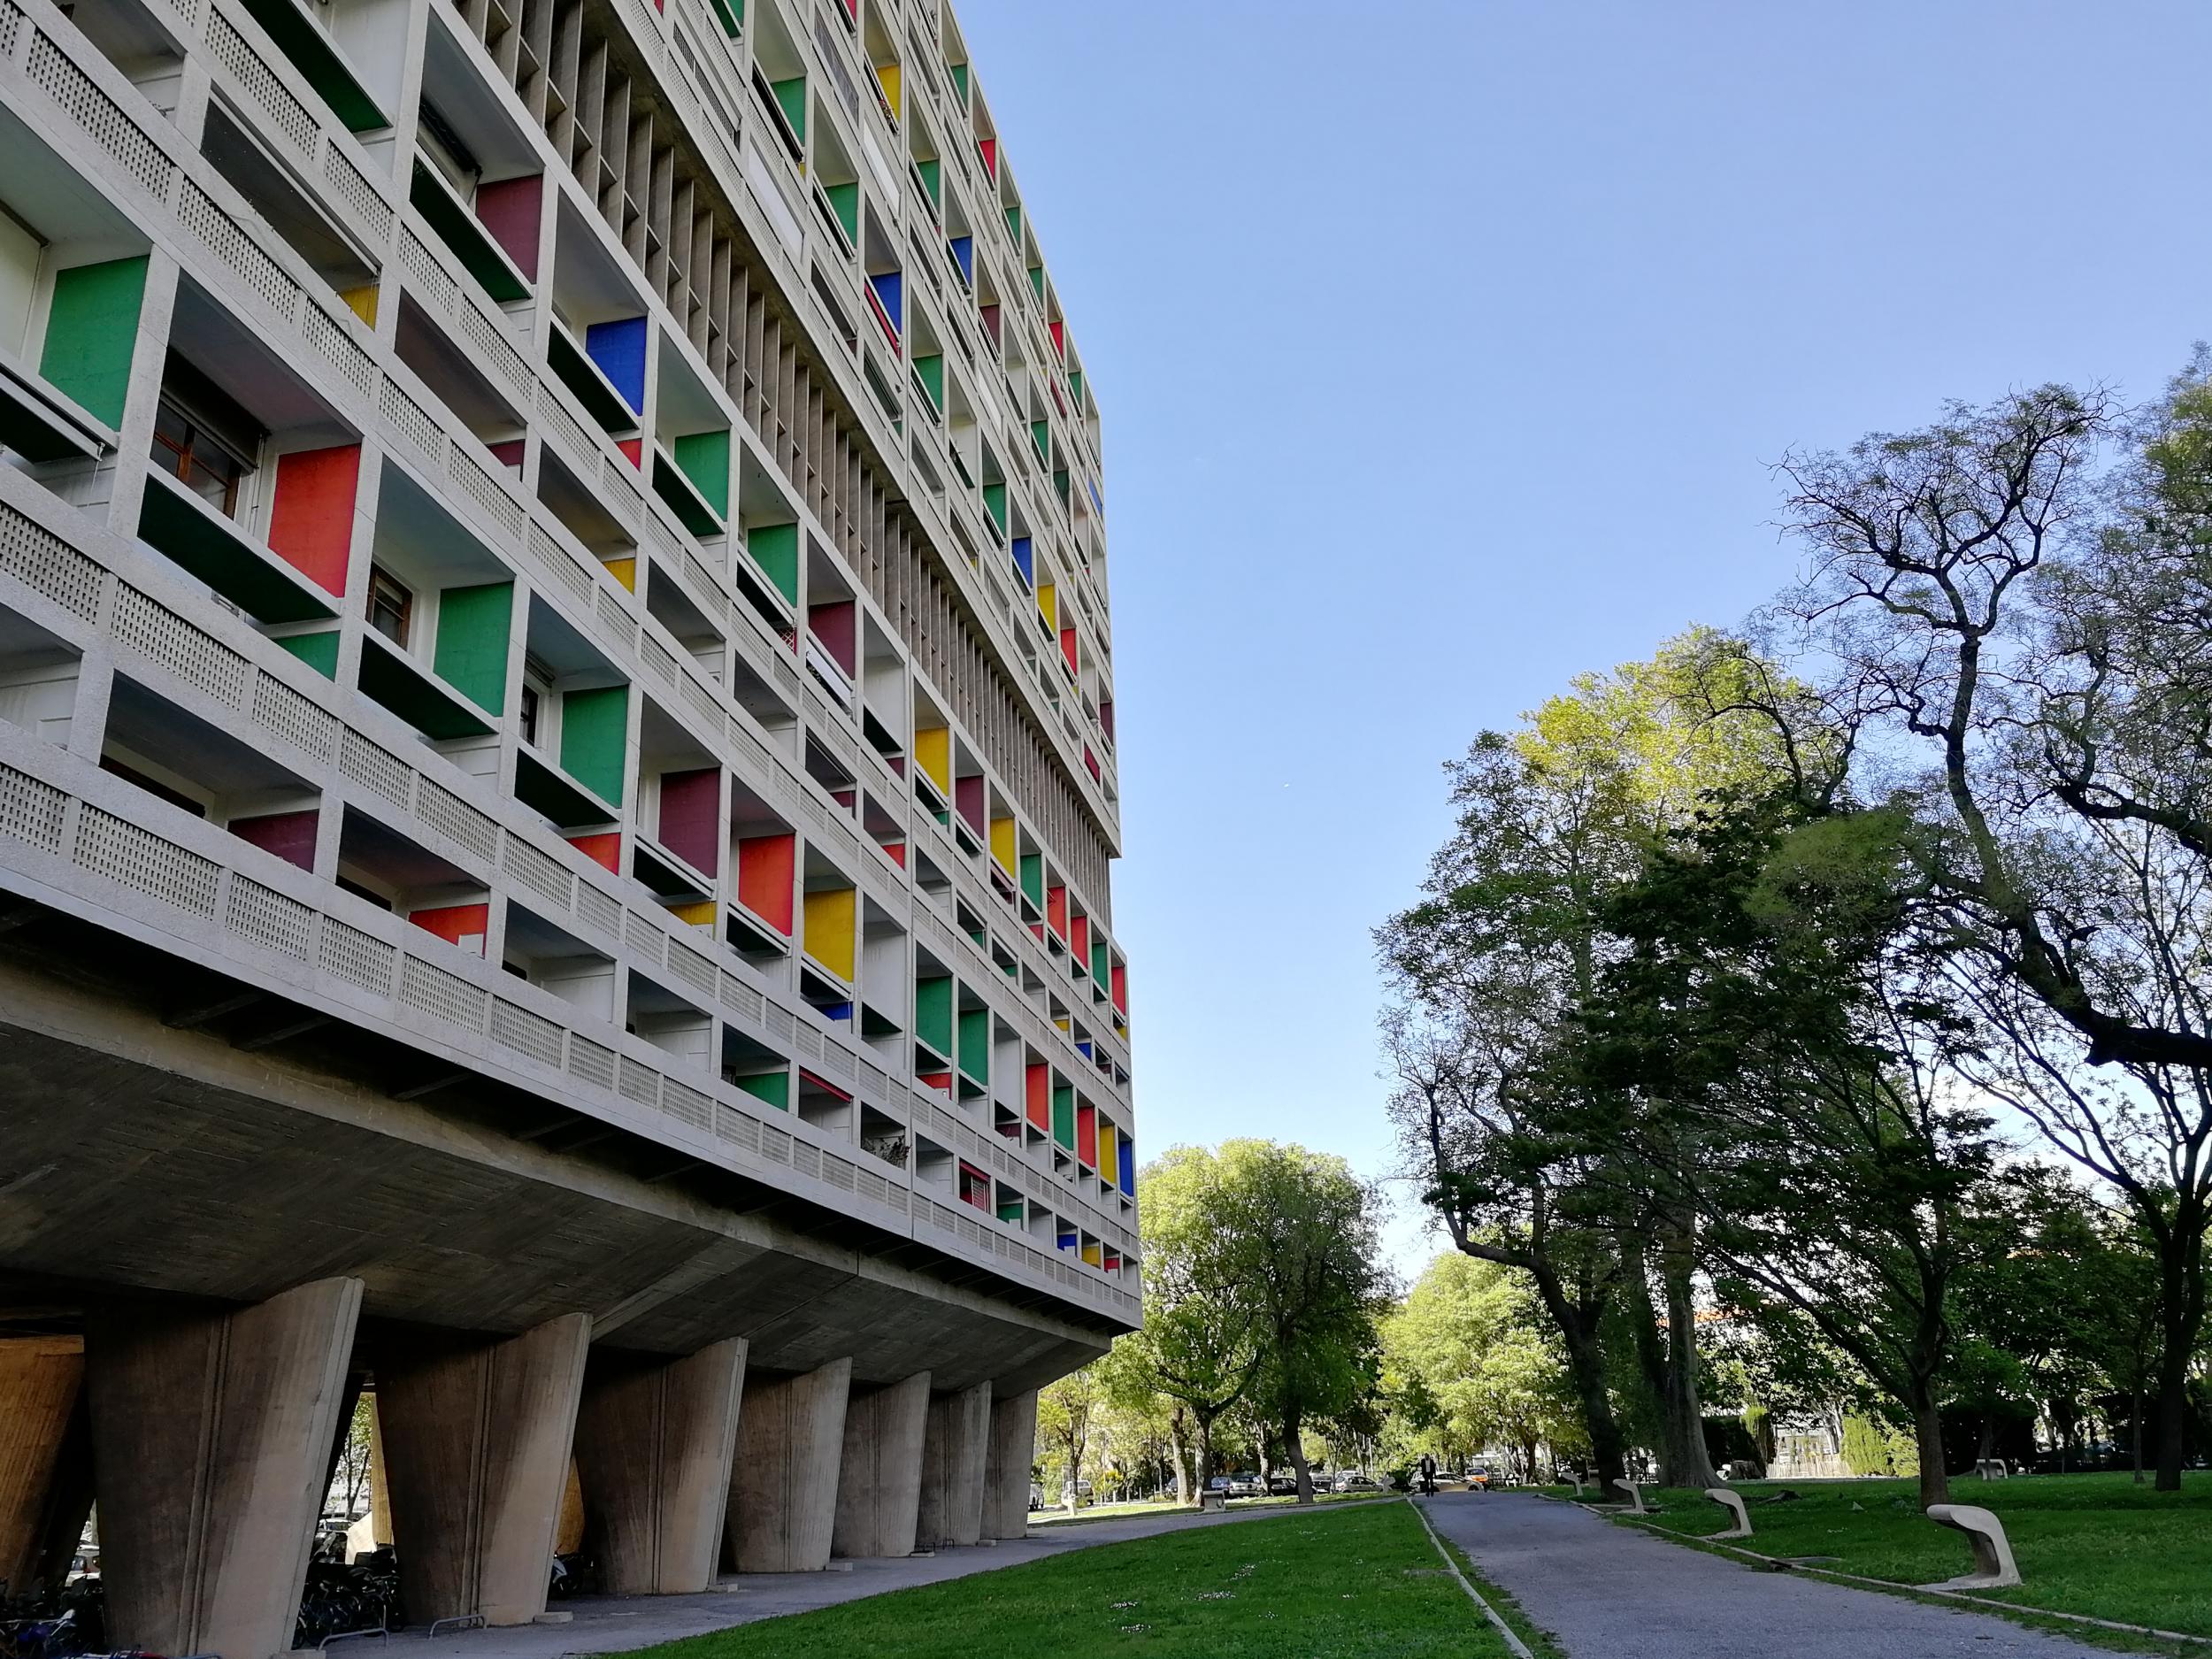 Corbusier’s masterpiece is one of Marseille’s best-known buildings